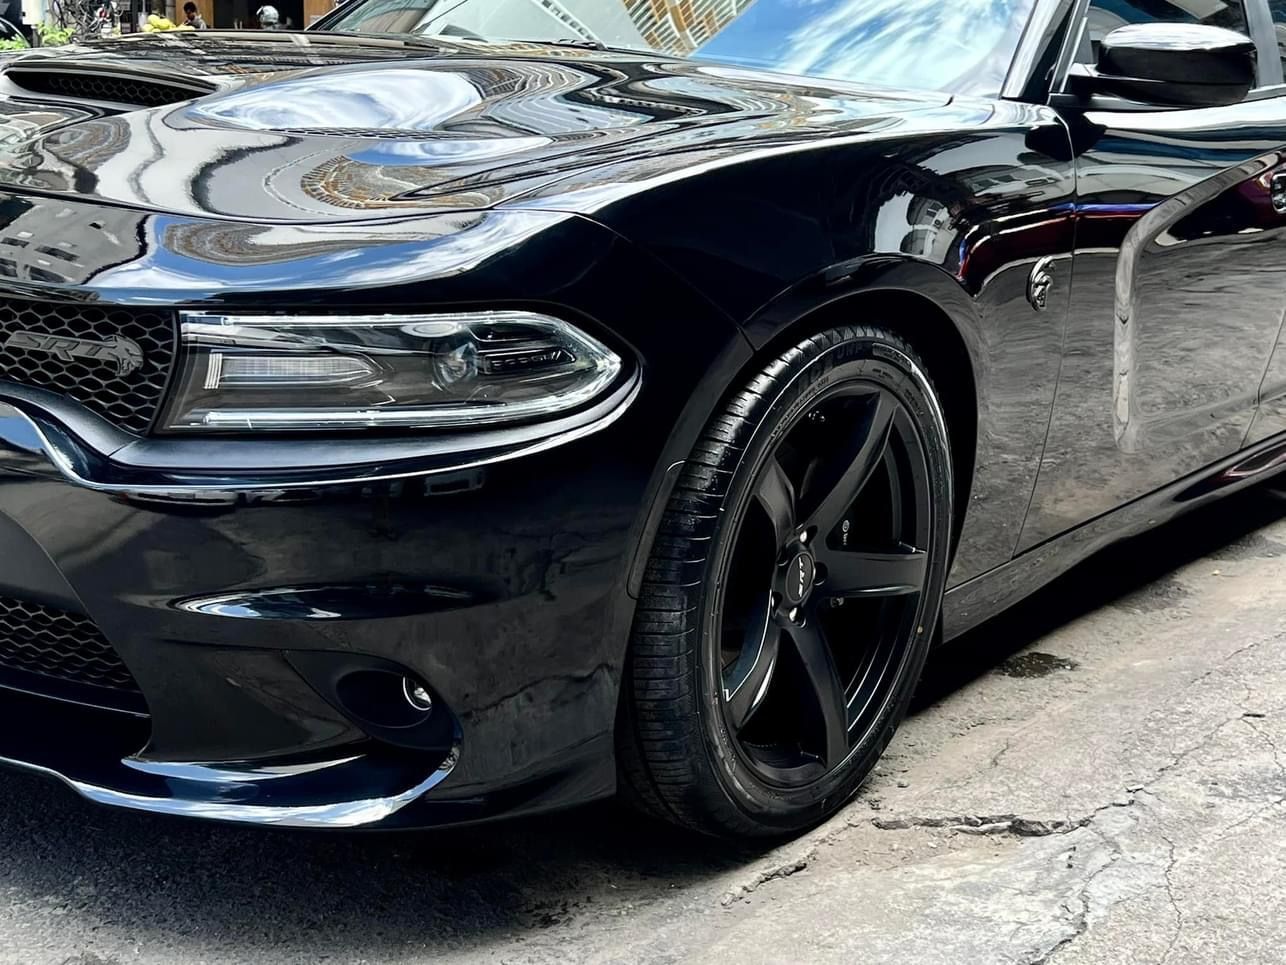 Dodge Charger 2019